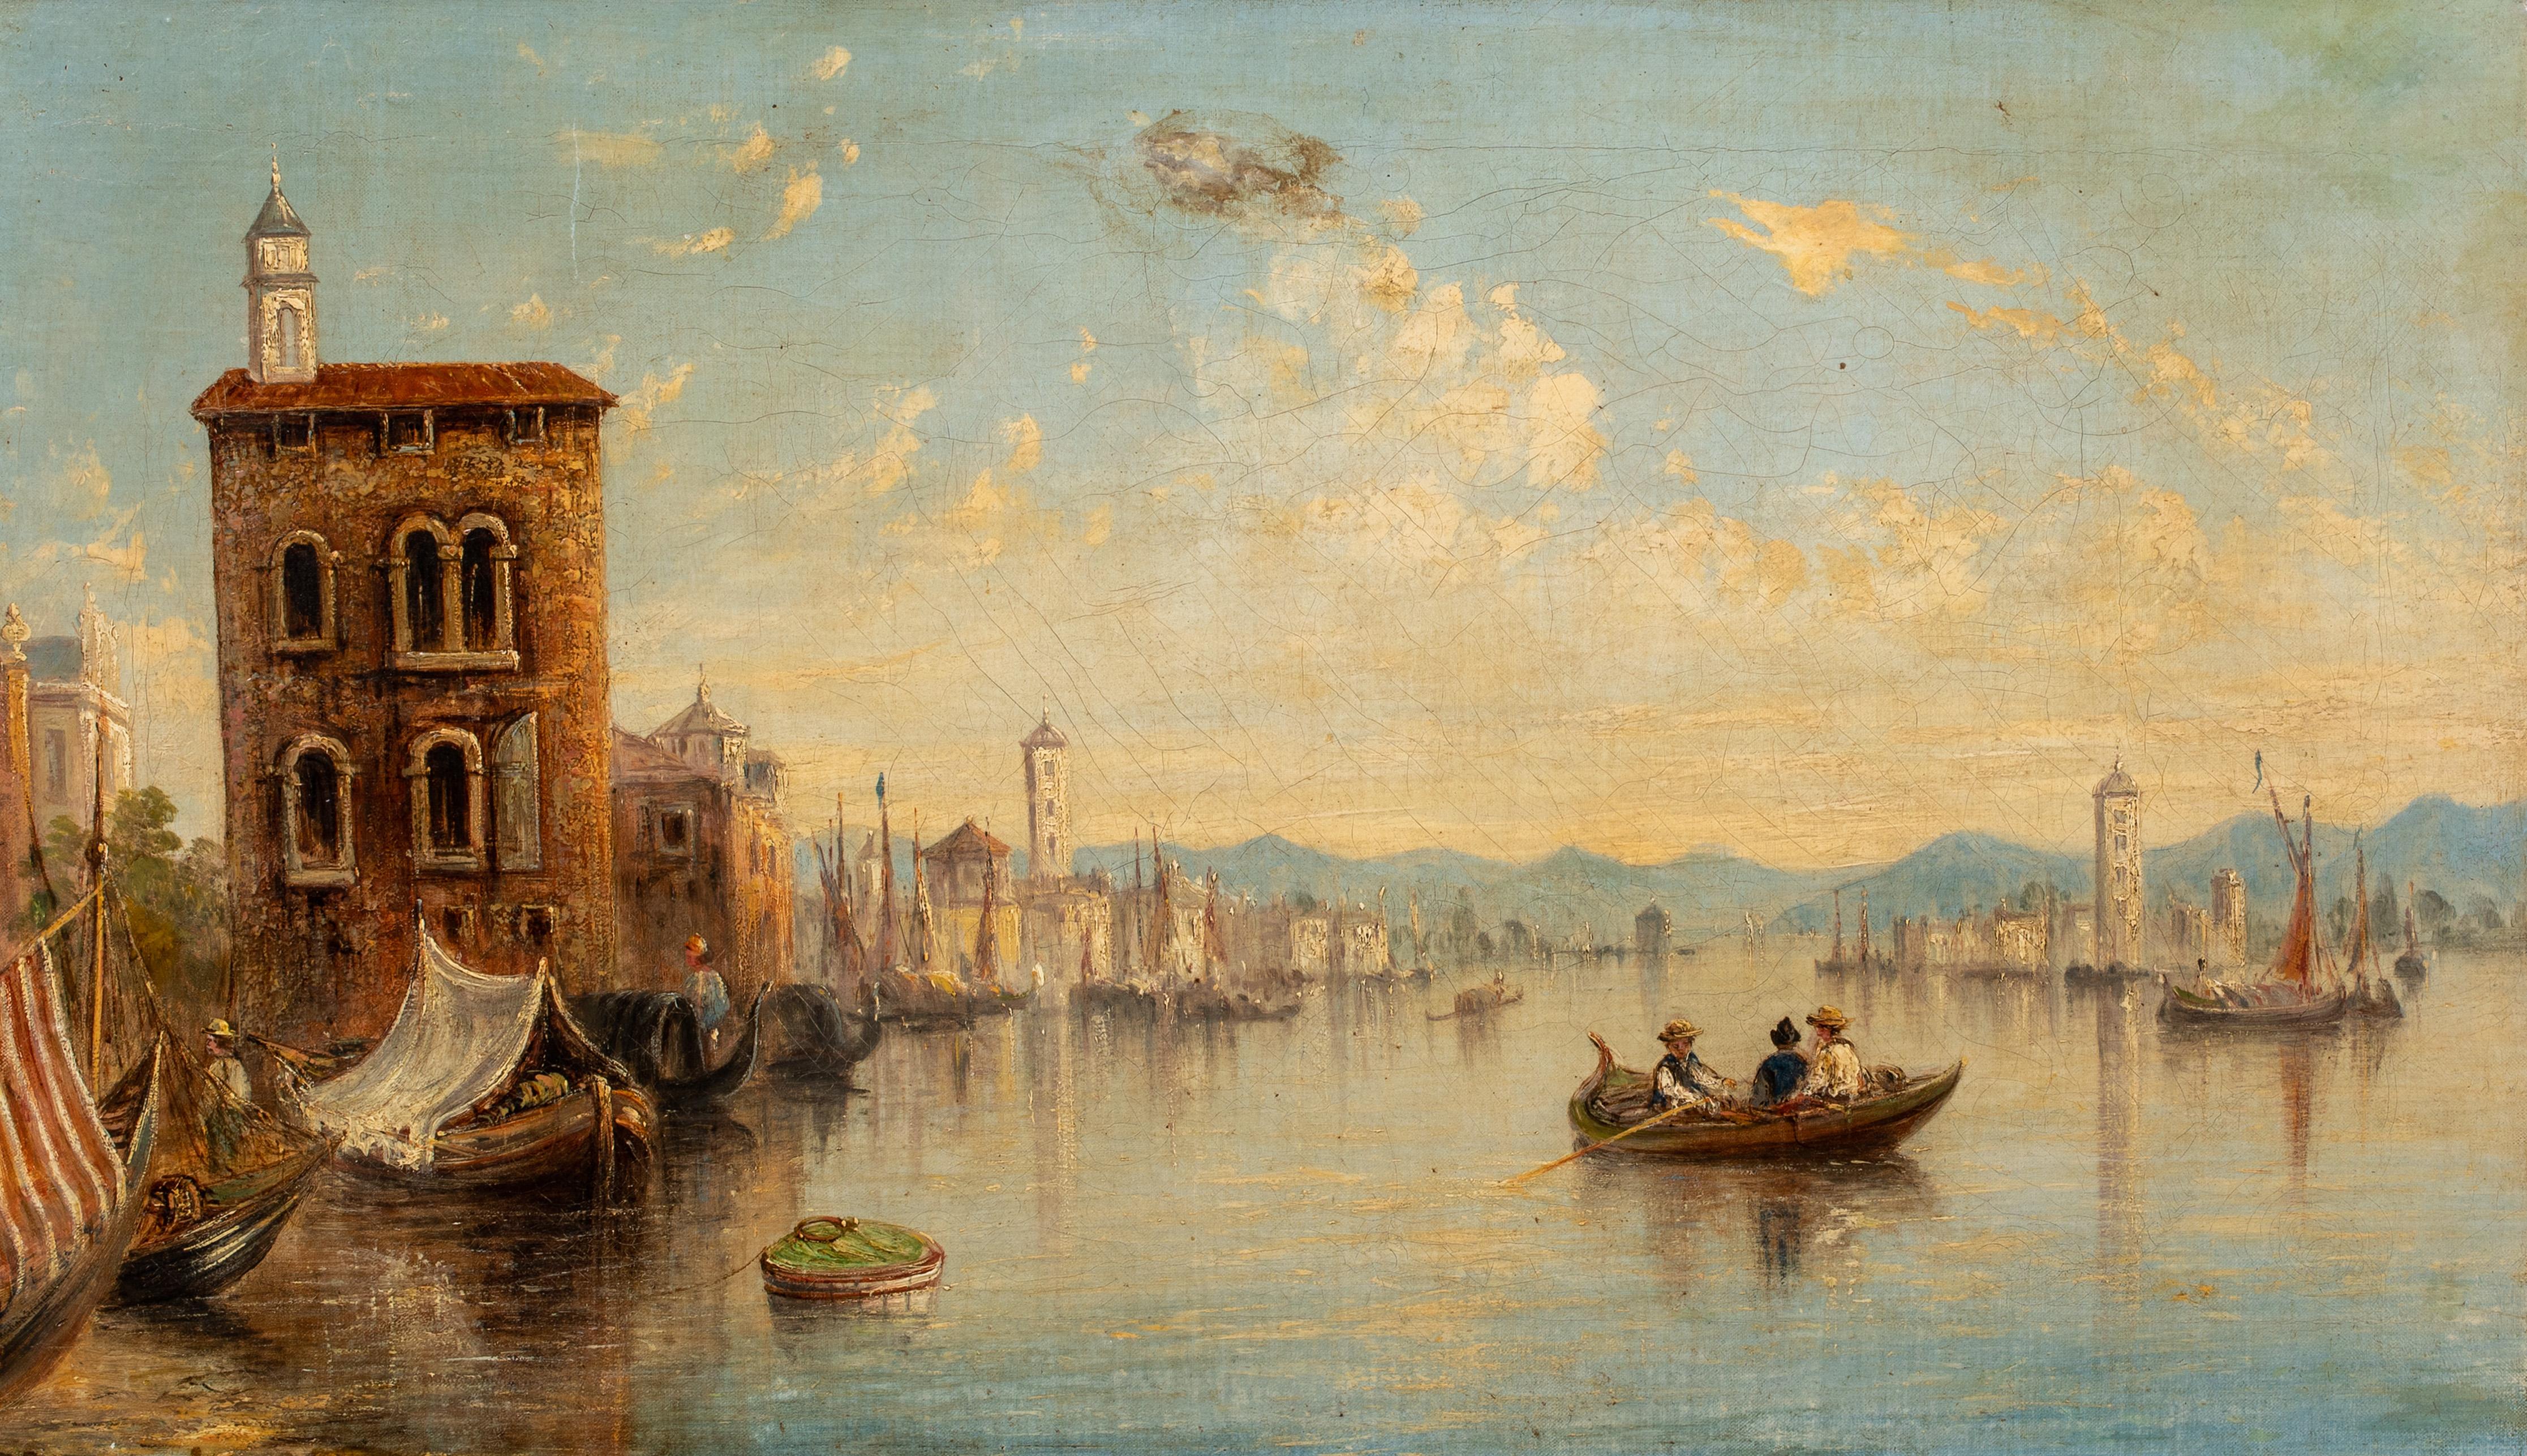 View Of Venice, 19th century - Brown Landscape Painting by James Salt